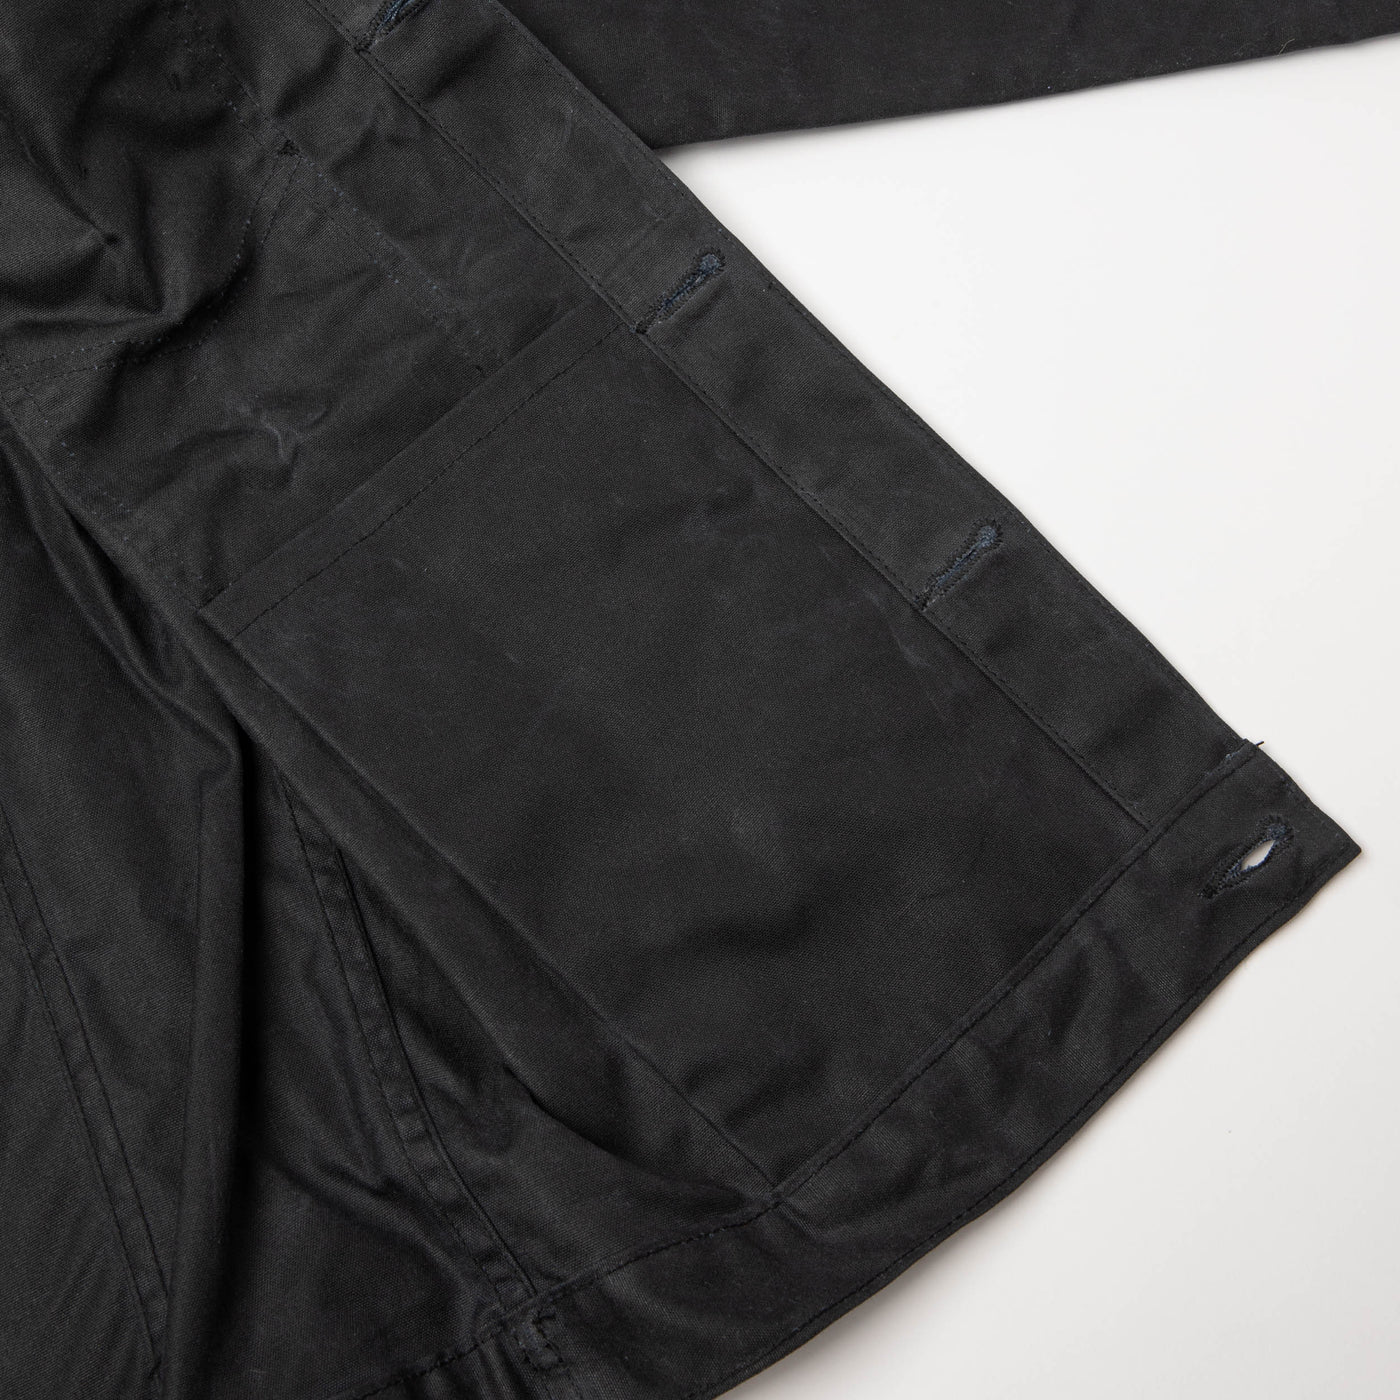 Detail view of internal pocket on left side of Jacket. On a neutral background.